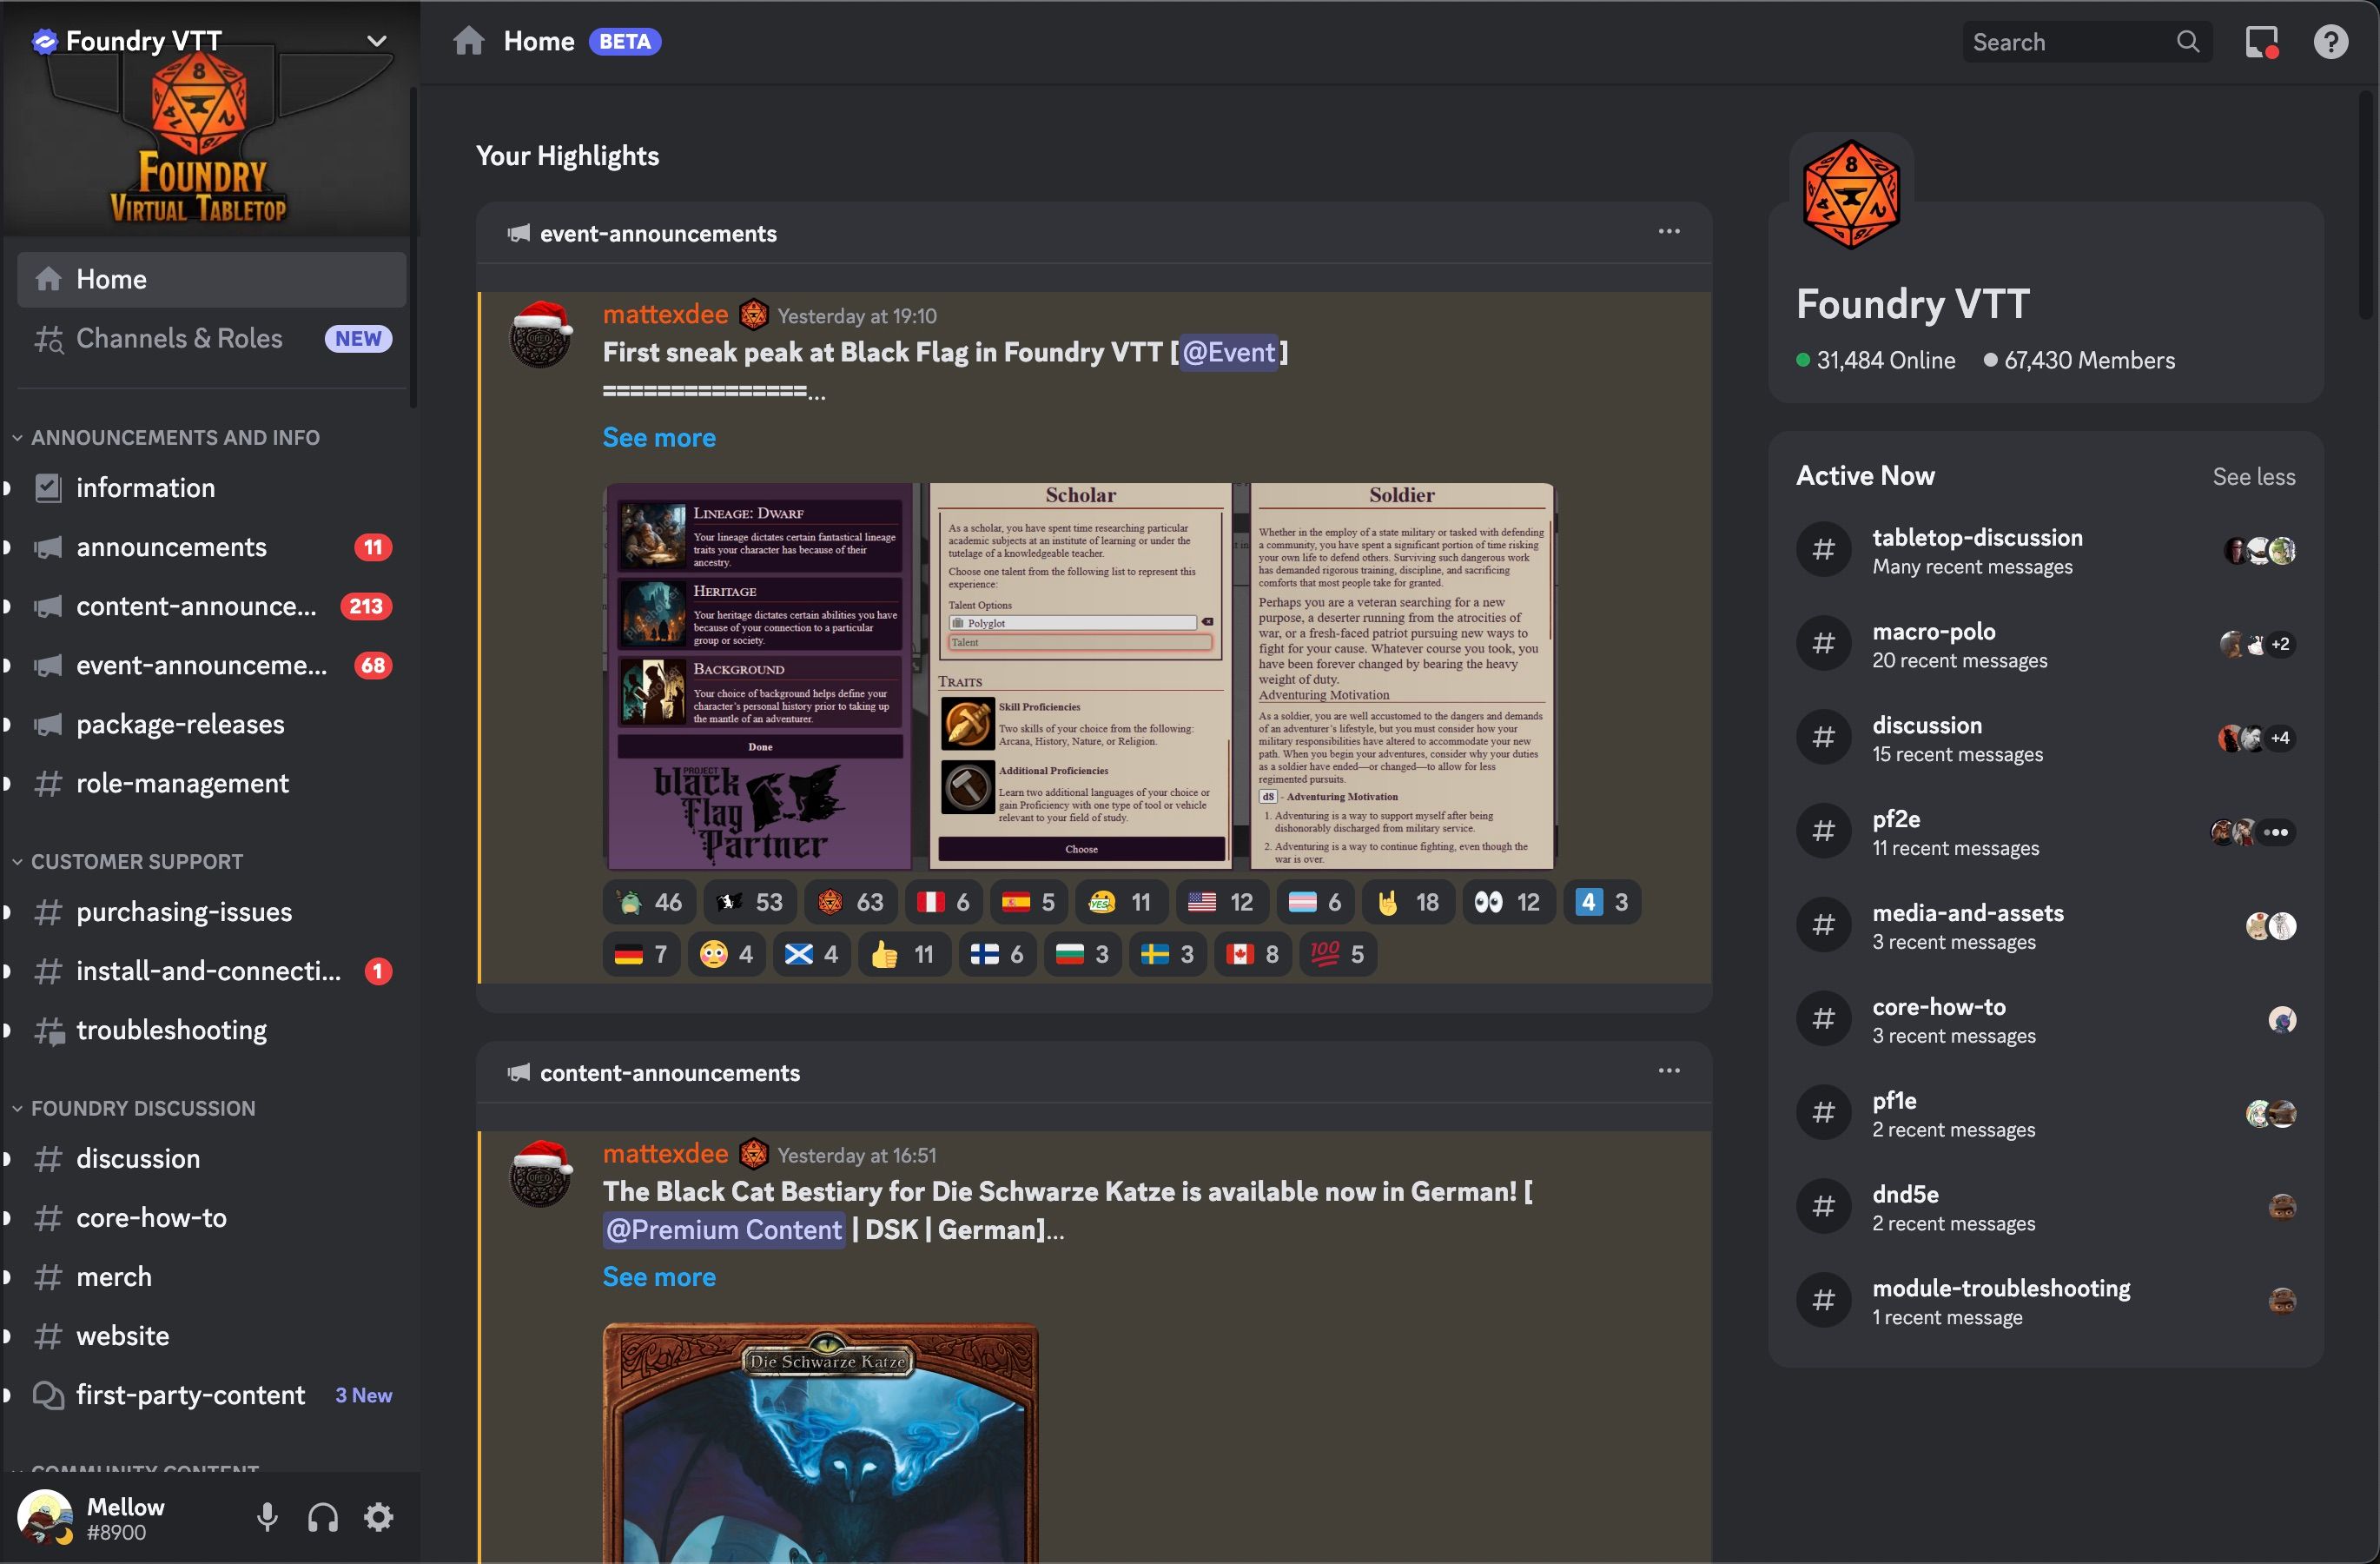 FoundryVTT Discord channel's home page